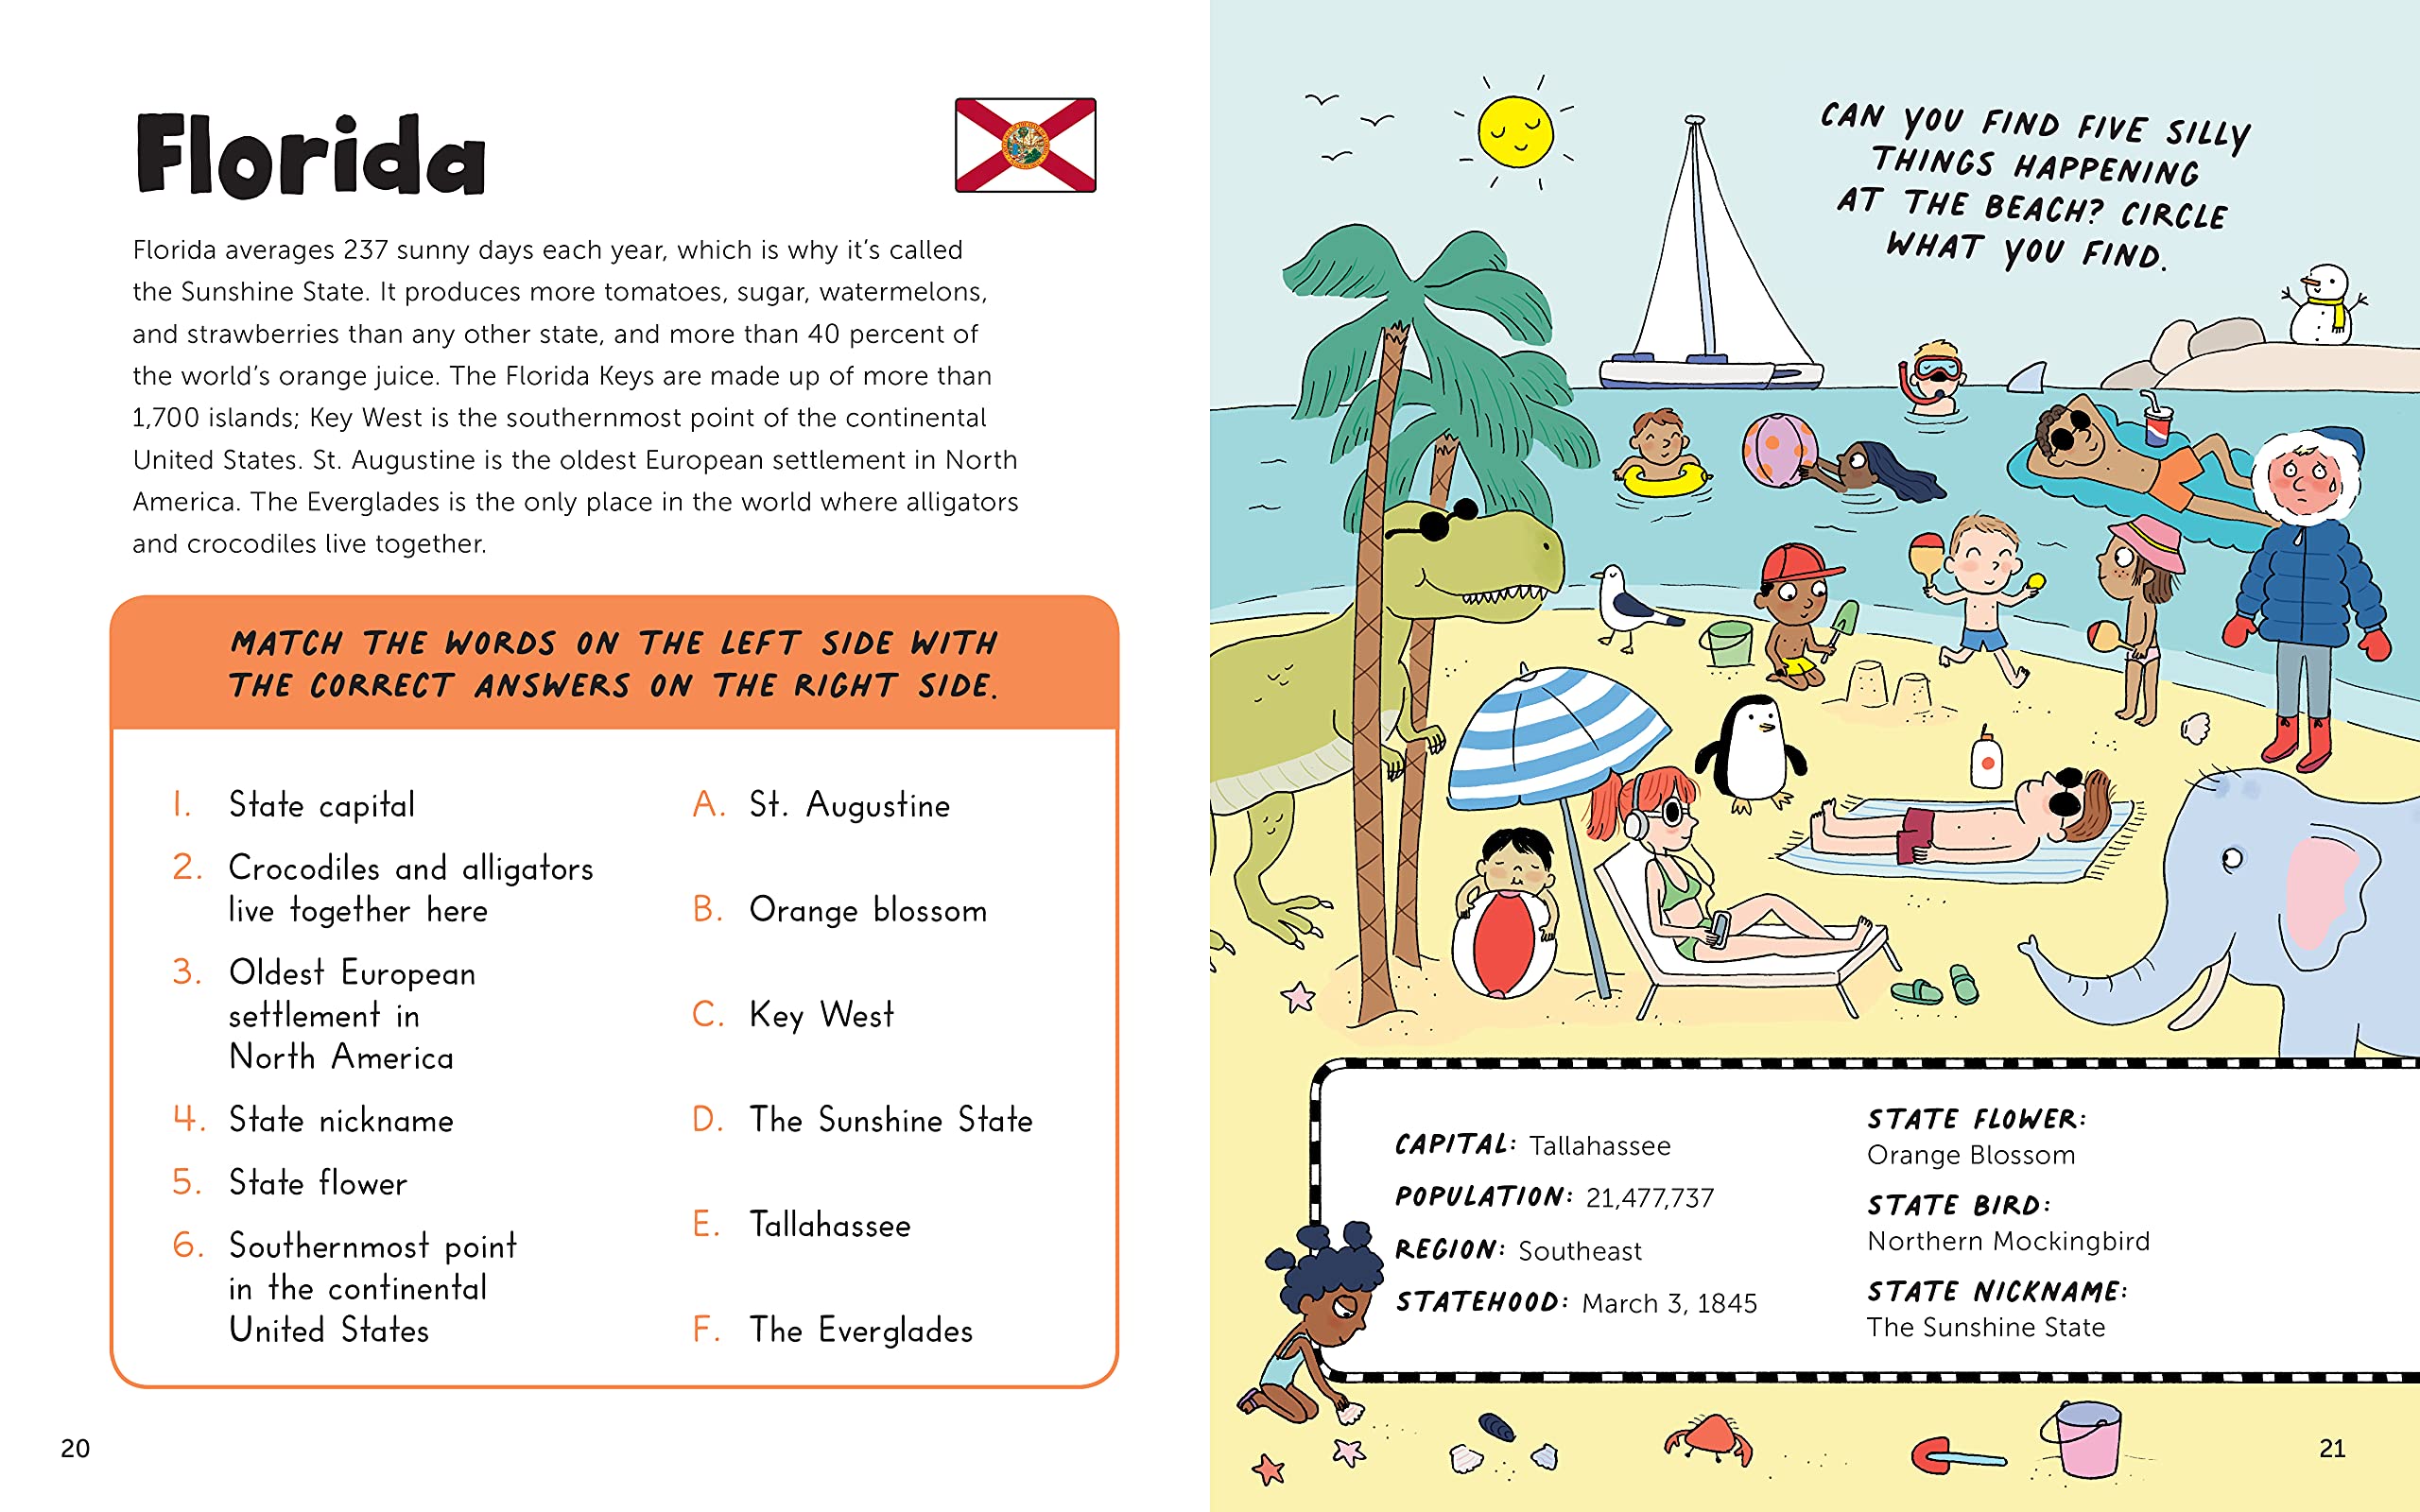 Fun with 50 States: A Big Activity Book for Kids about the Amazing United States